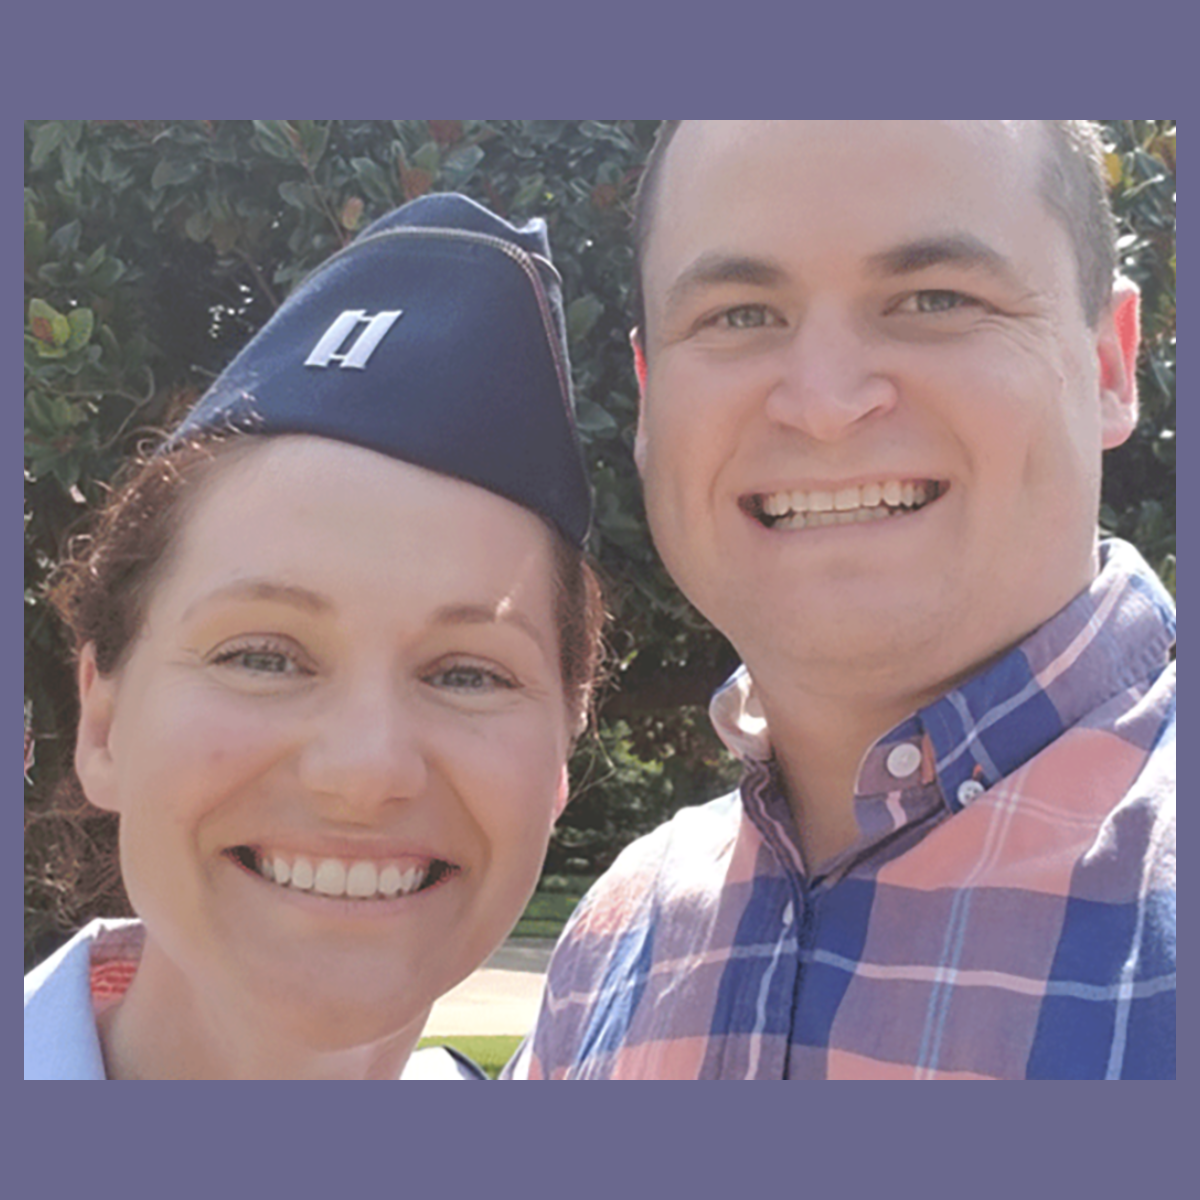 Photo of a man and a woman, both veterans with one in uniform, smiling for a selfie together